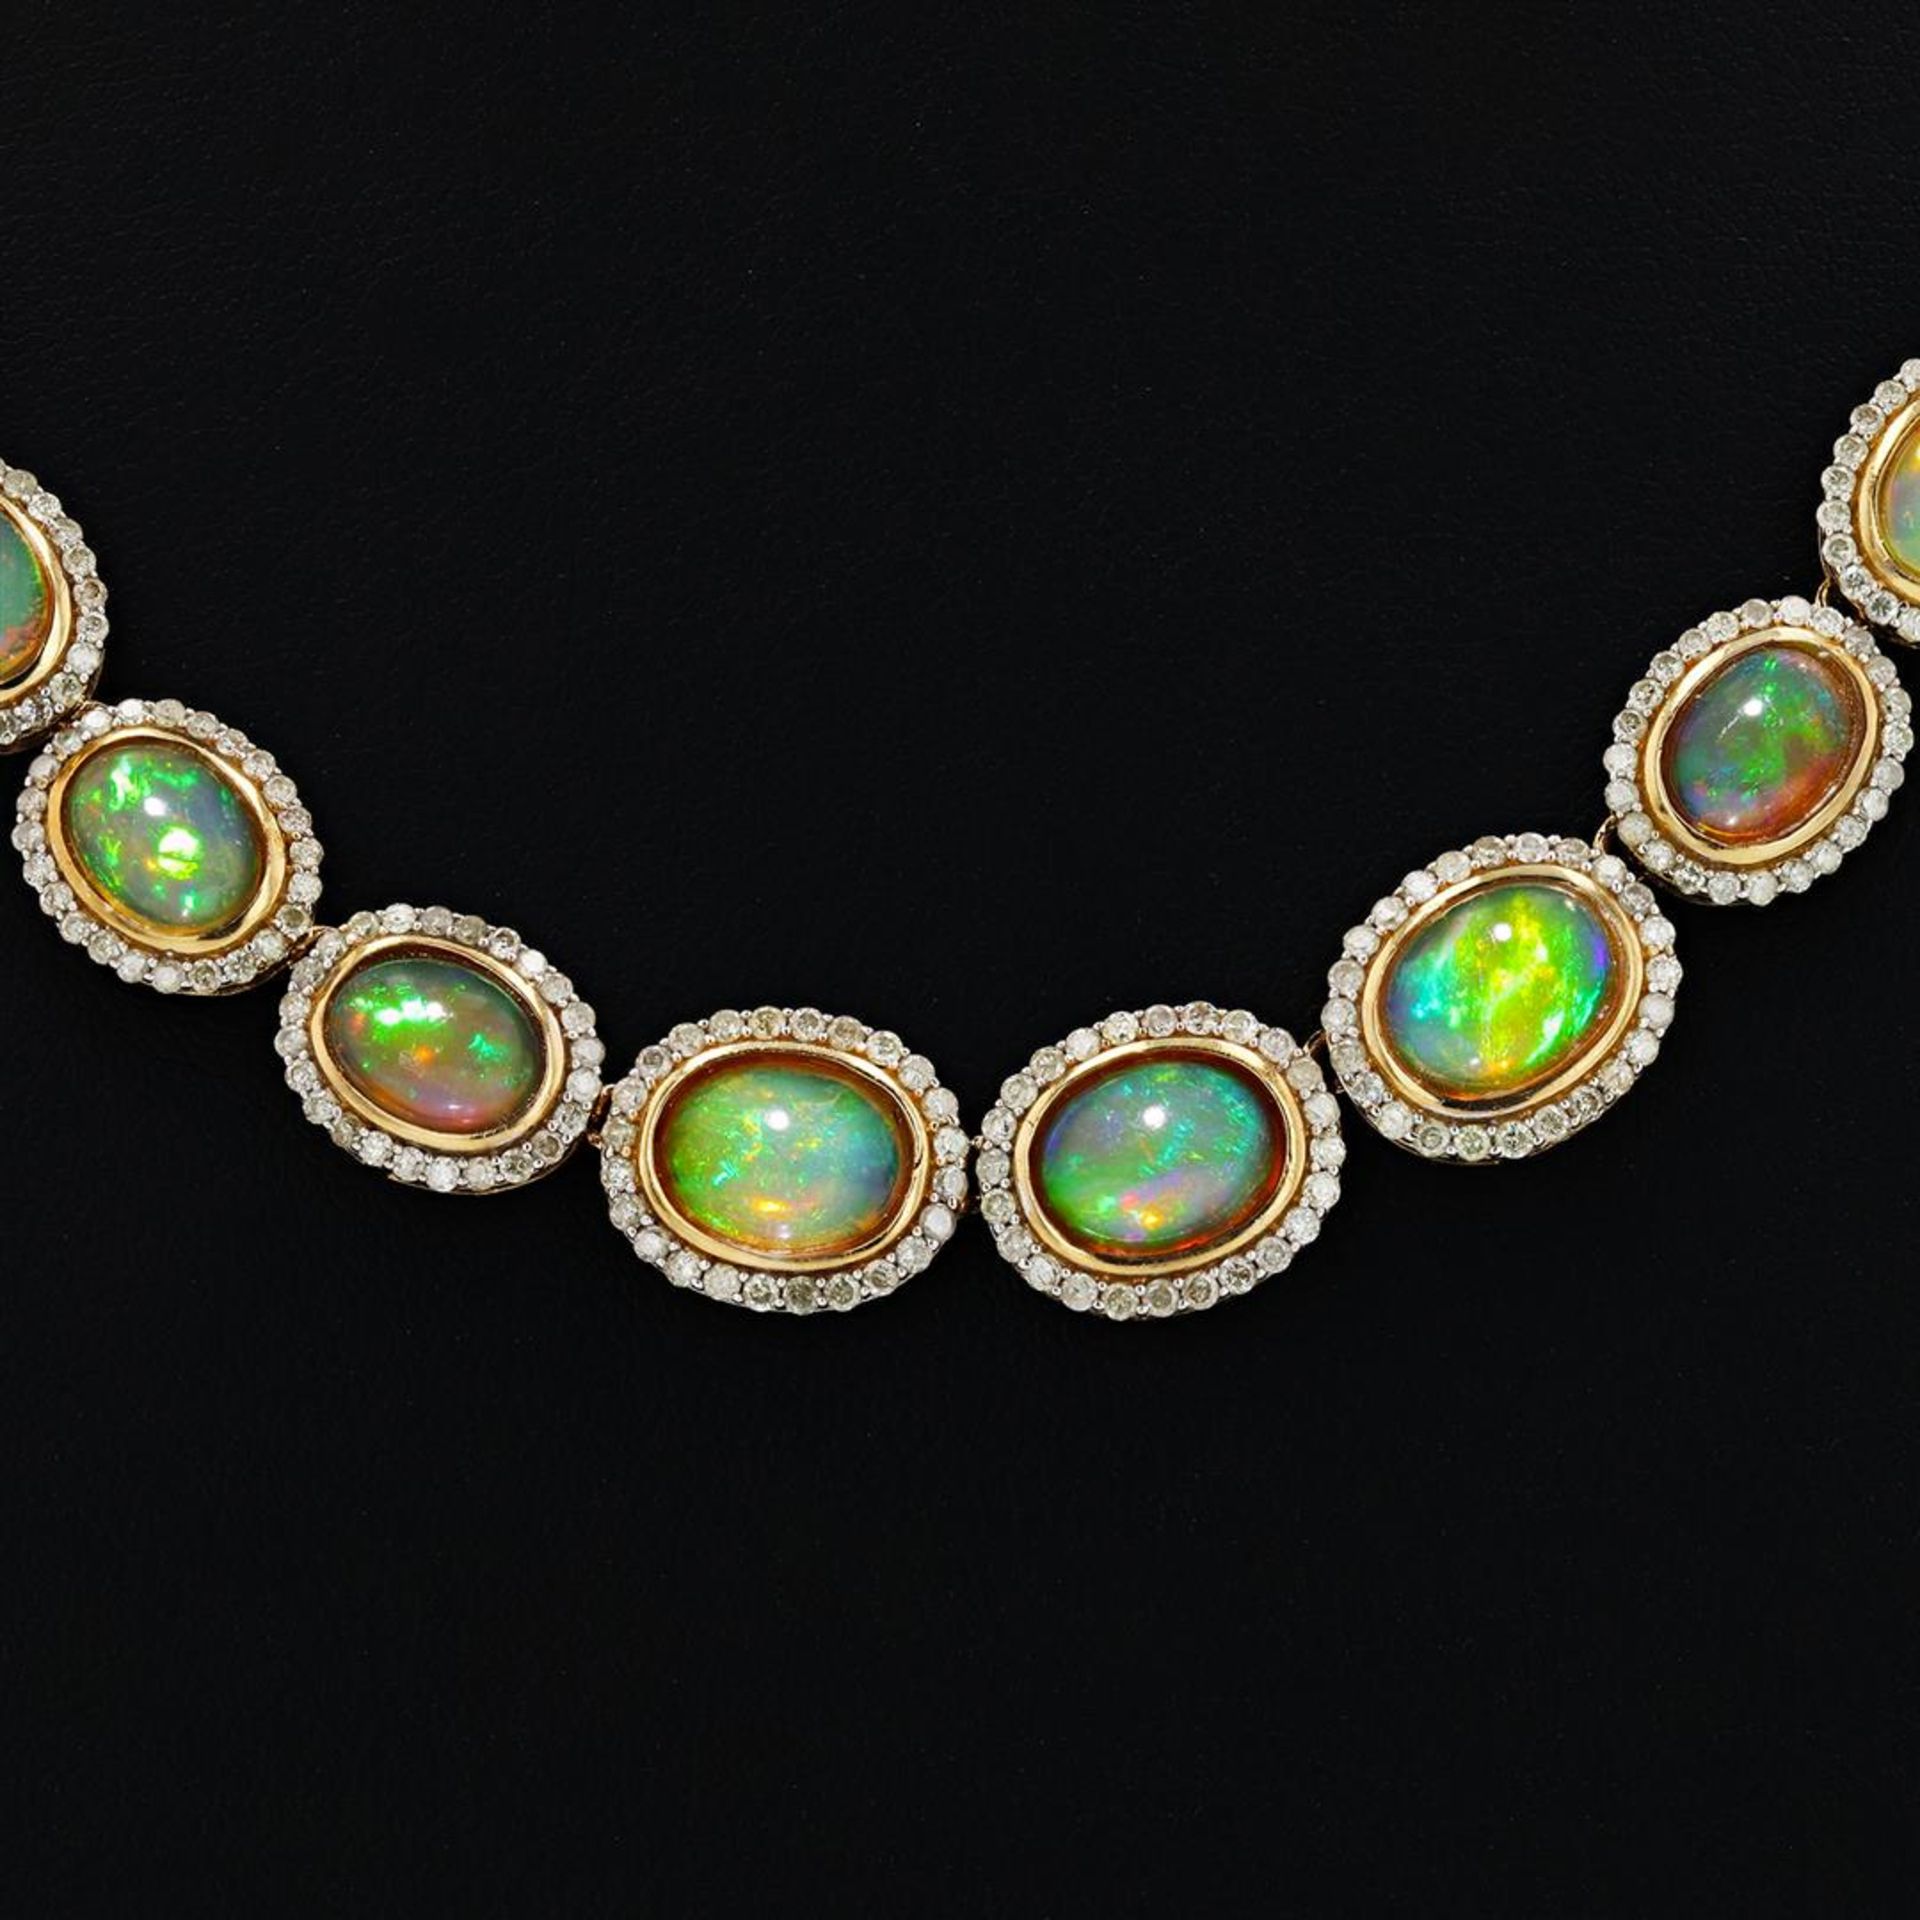 24.97 ctw Opal and 6.00 ctw Diamond 14K Yellow Gold Necklace - Image 2 of 4